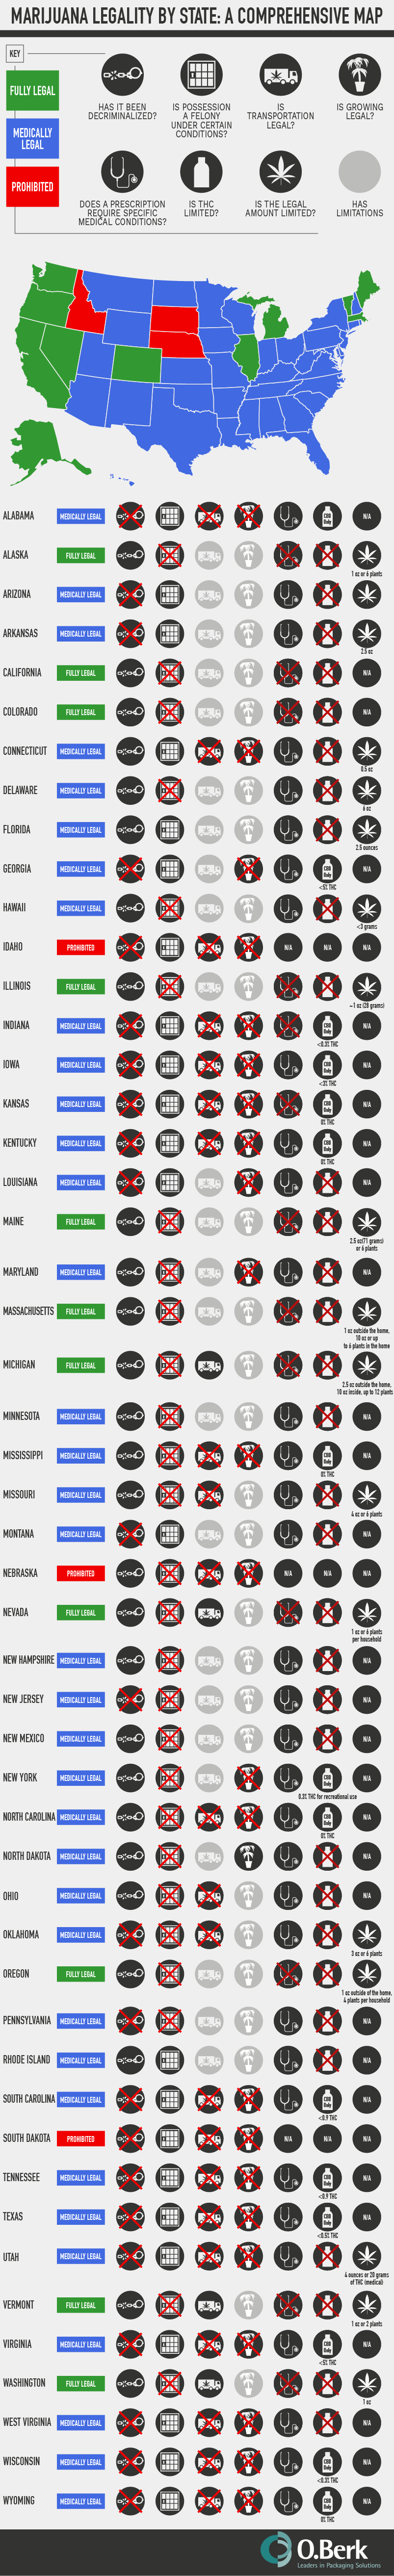 Marijuana Laws by State in 2020 #infographic